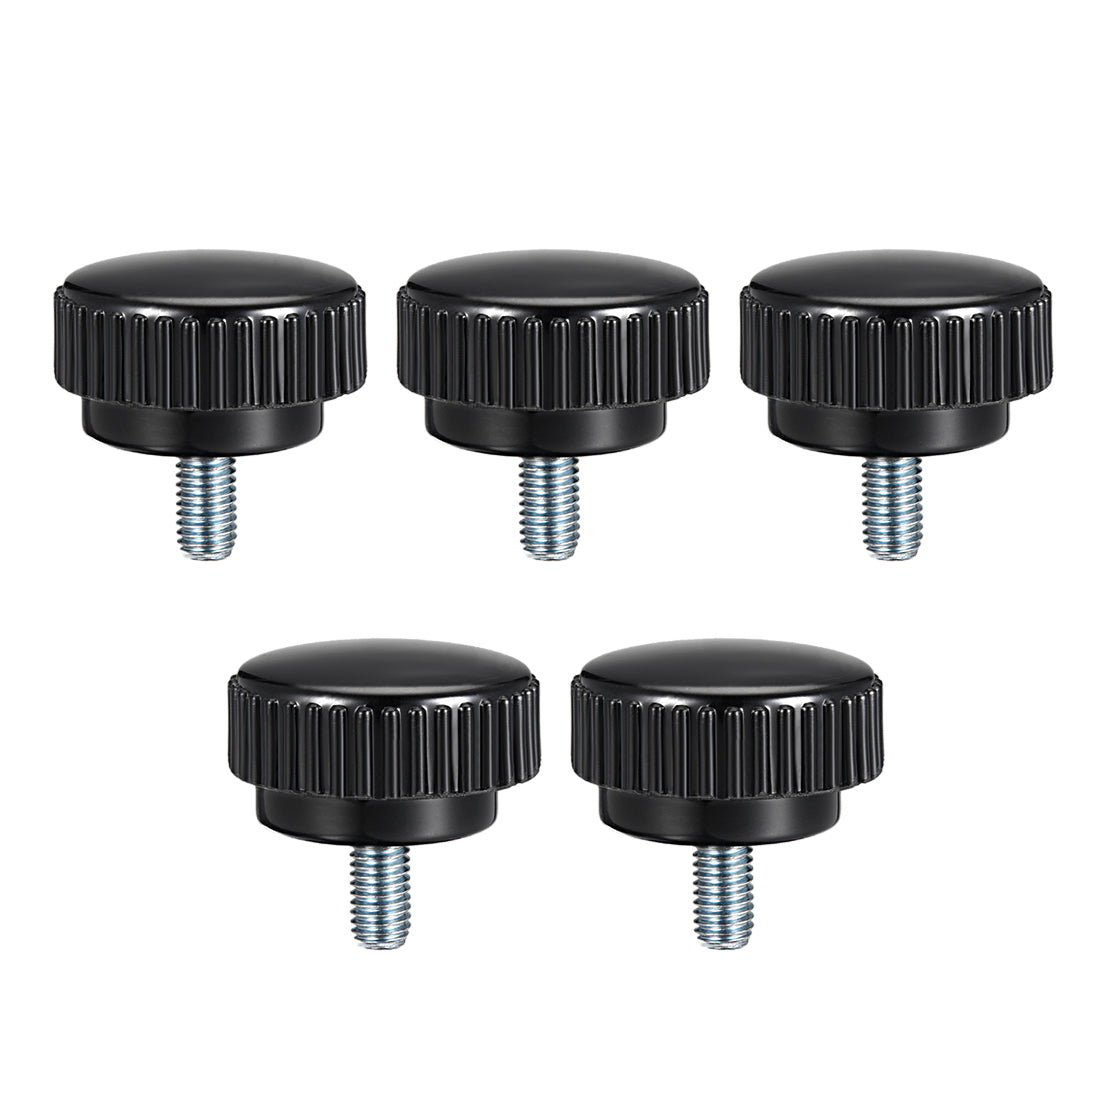 uxcell Uxcell M8 x 15mm Male Thread Knurled Clamping Knobs Grip Thumb Screw on Type 5 Pcs